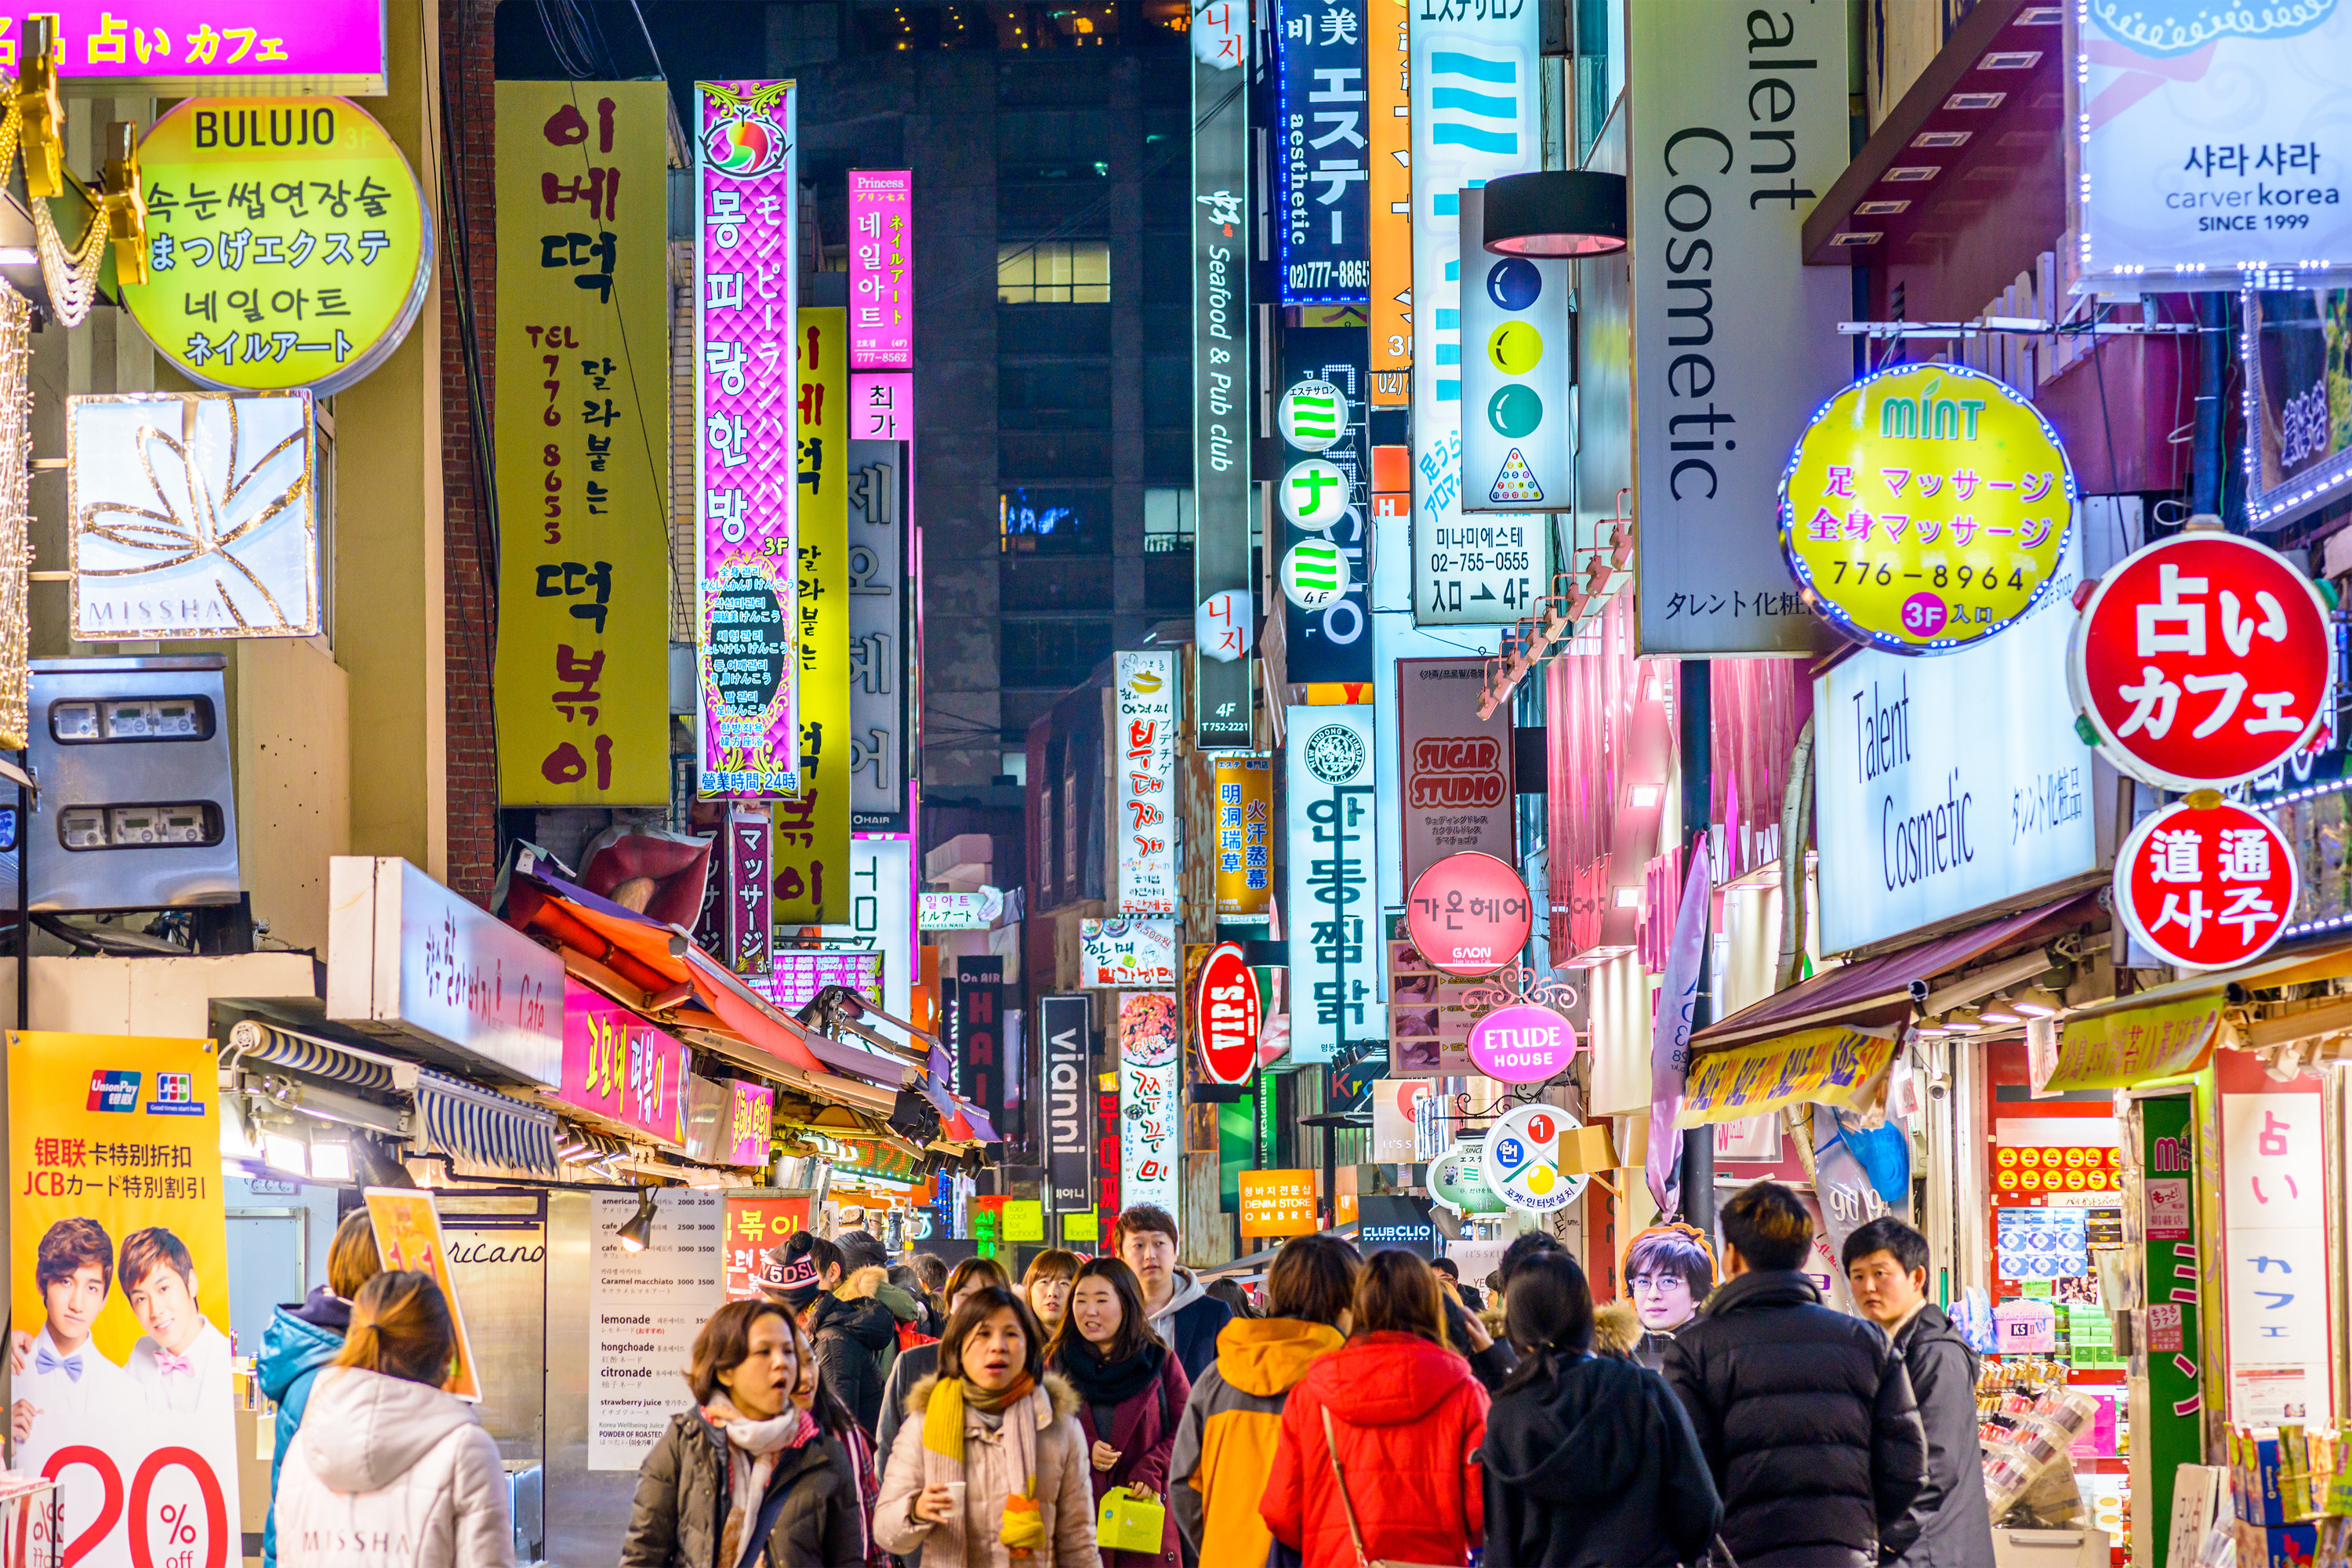 People walking around a busy South Korea street at night with vendors/stores on the side